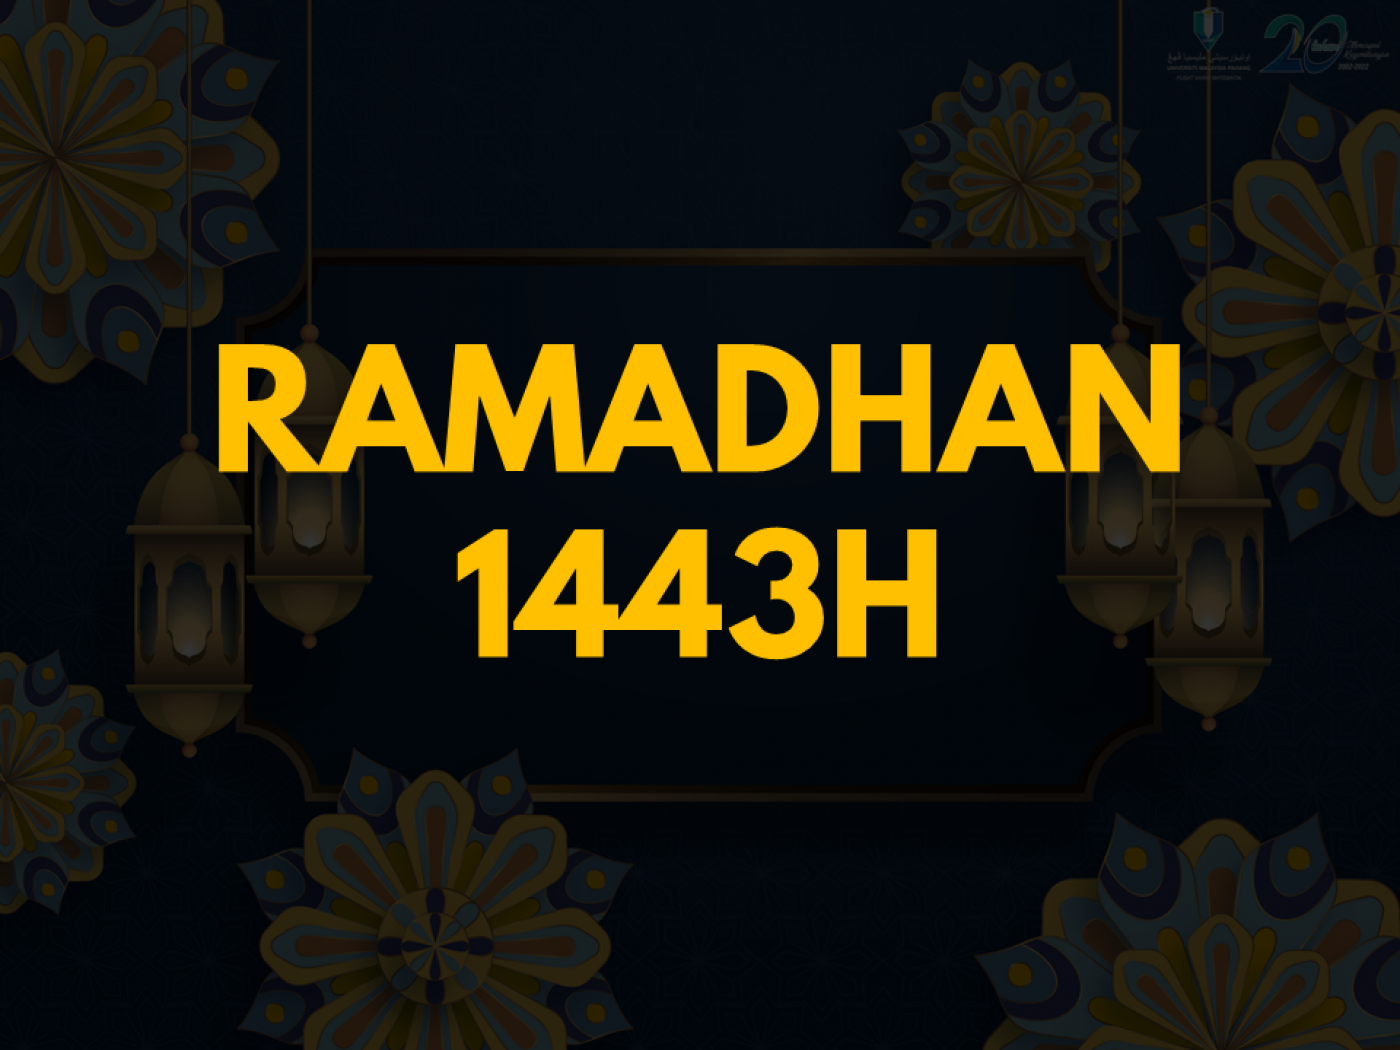 Ramadan 1443H wishes from PSM